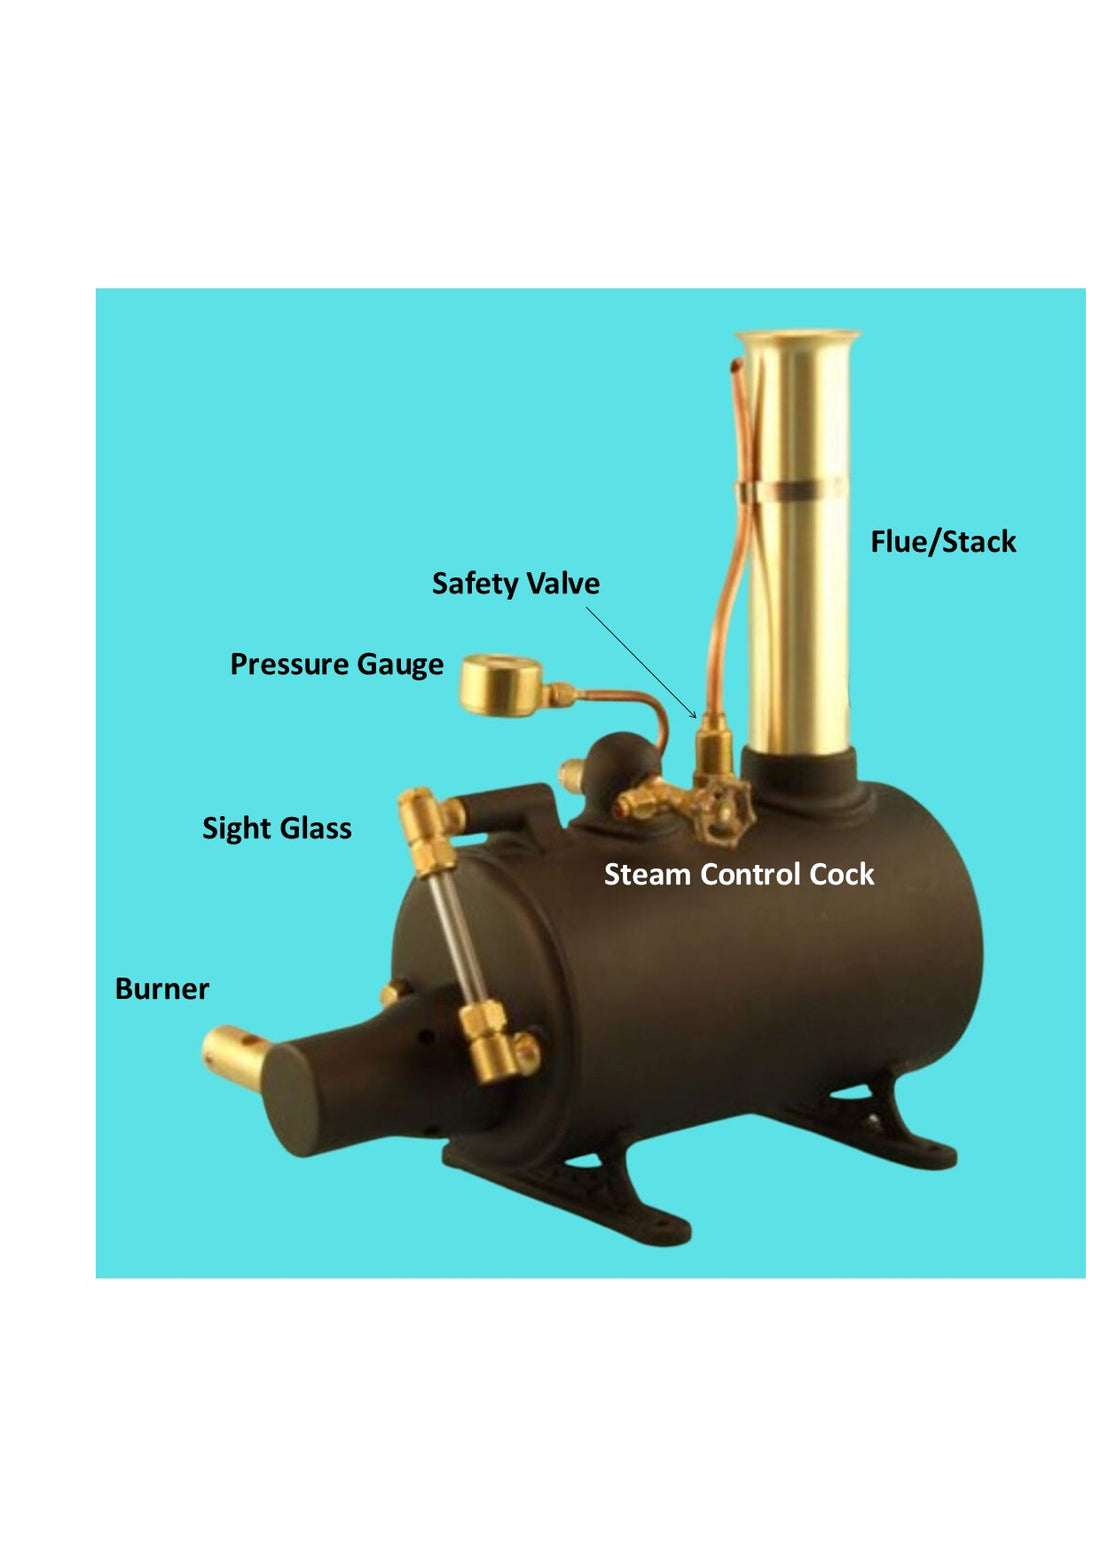 2. Introduction to MSM Boilers